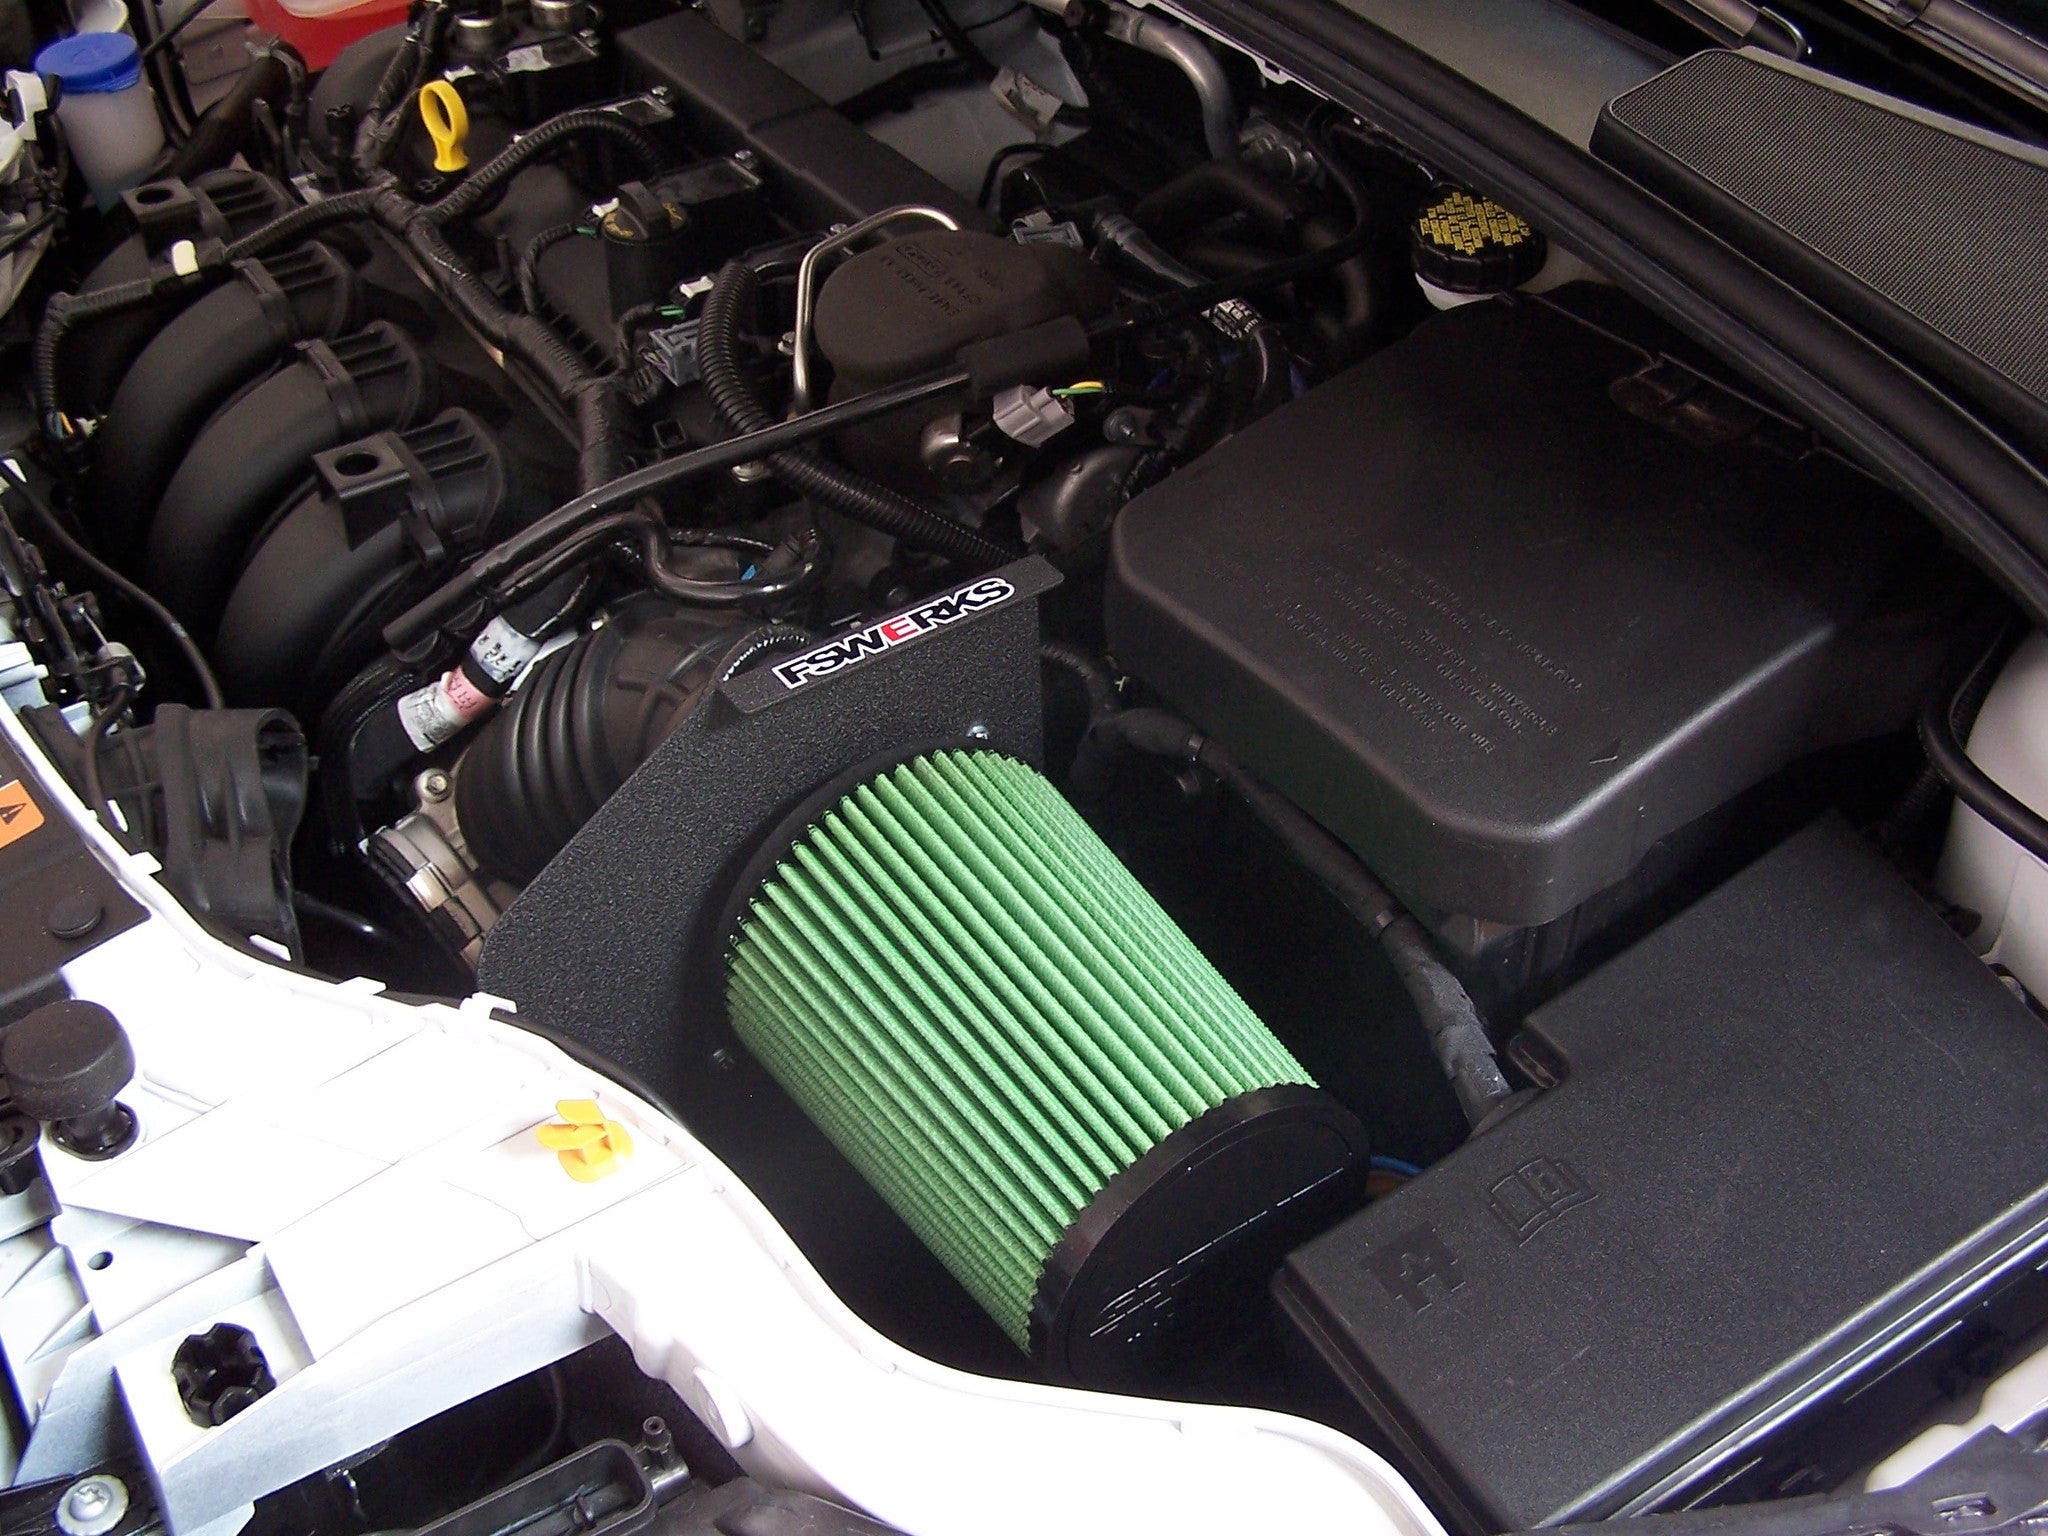 FSWERKS FSWERKS Green Filter Cool-Flo Air Intake System - Ford Focus Duratec TiVCT 2.0L 2012-2016 - 1